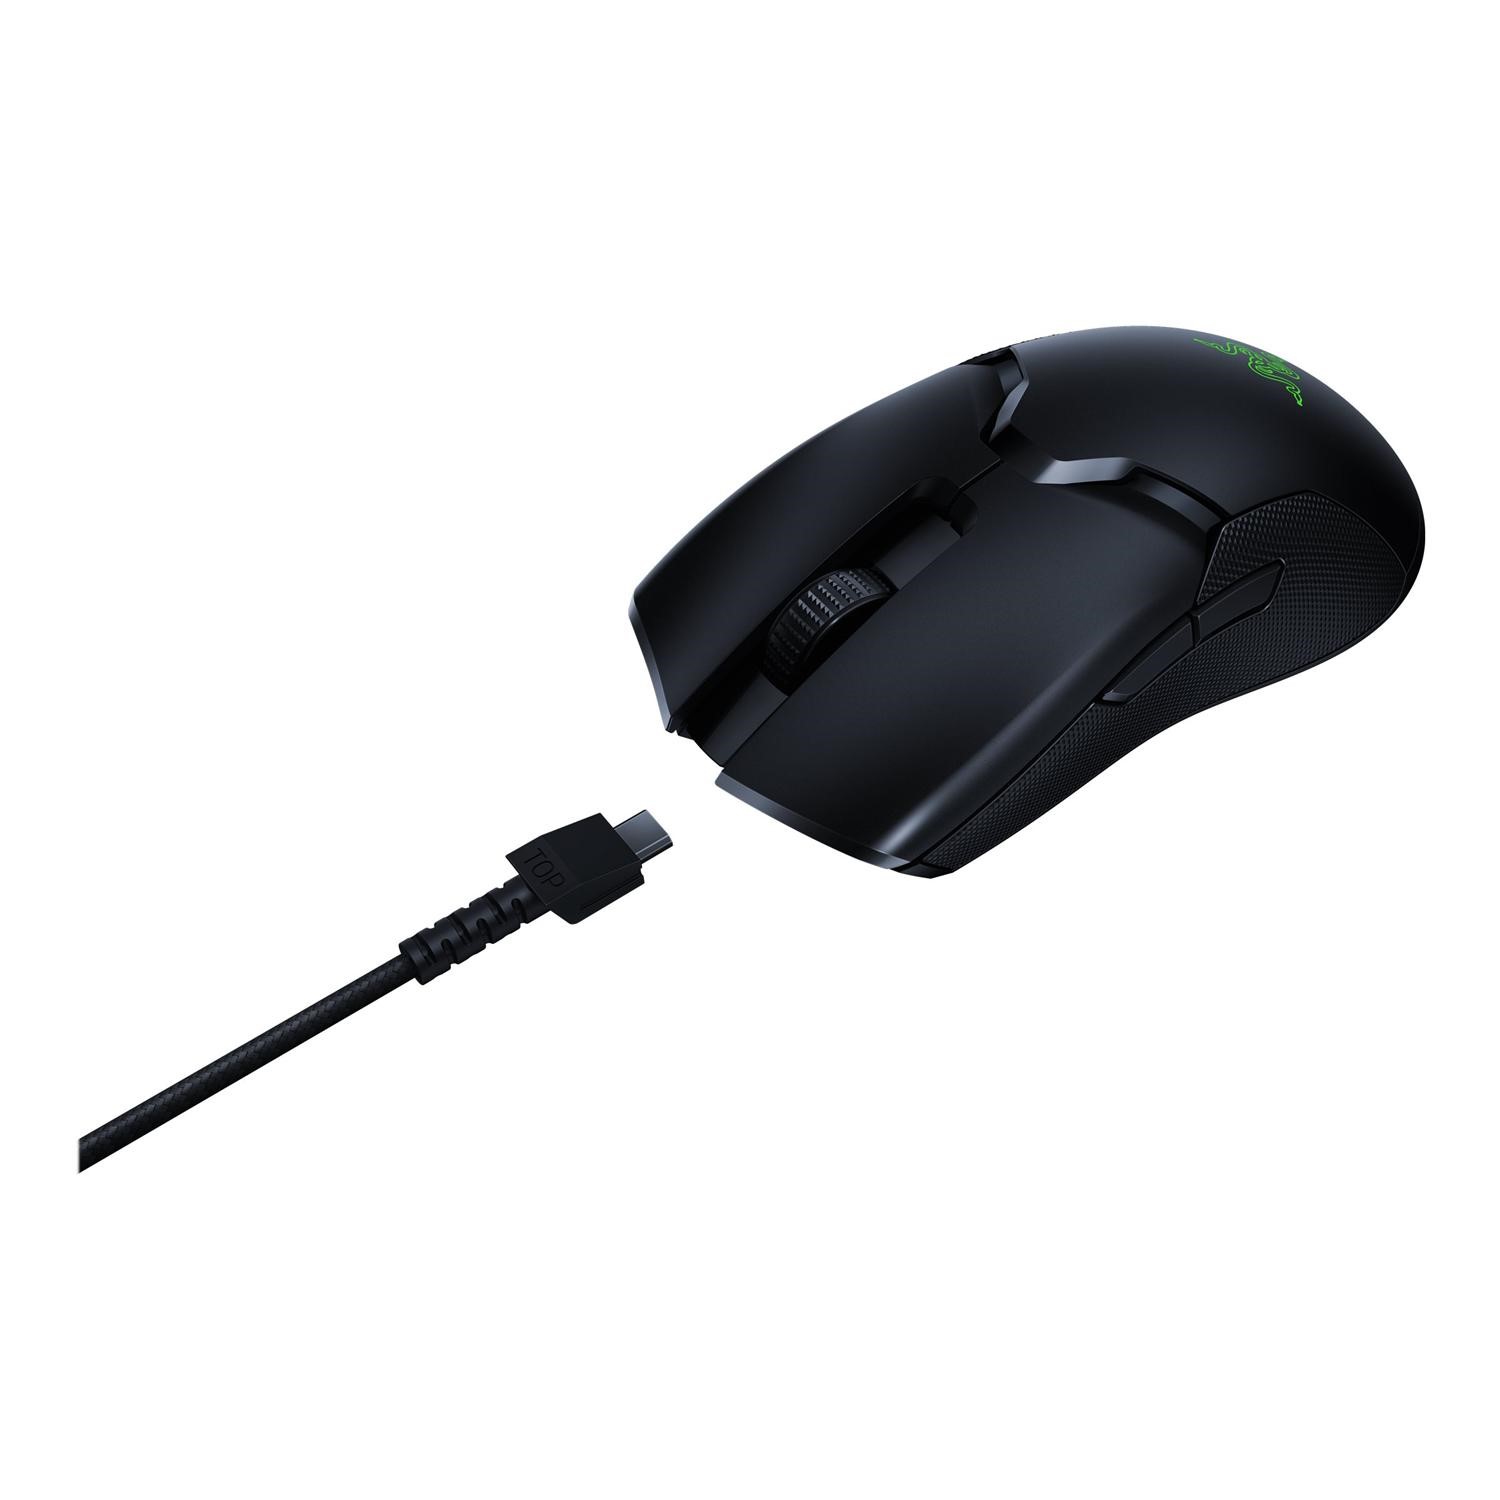 Razer Viper Ultimate Wireless Gaming Mouse Laptops Direct